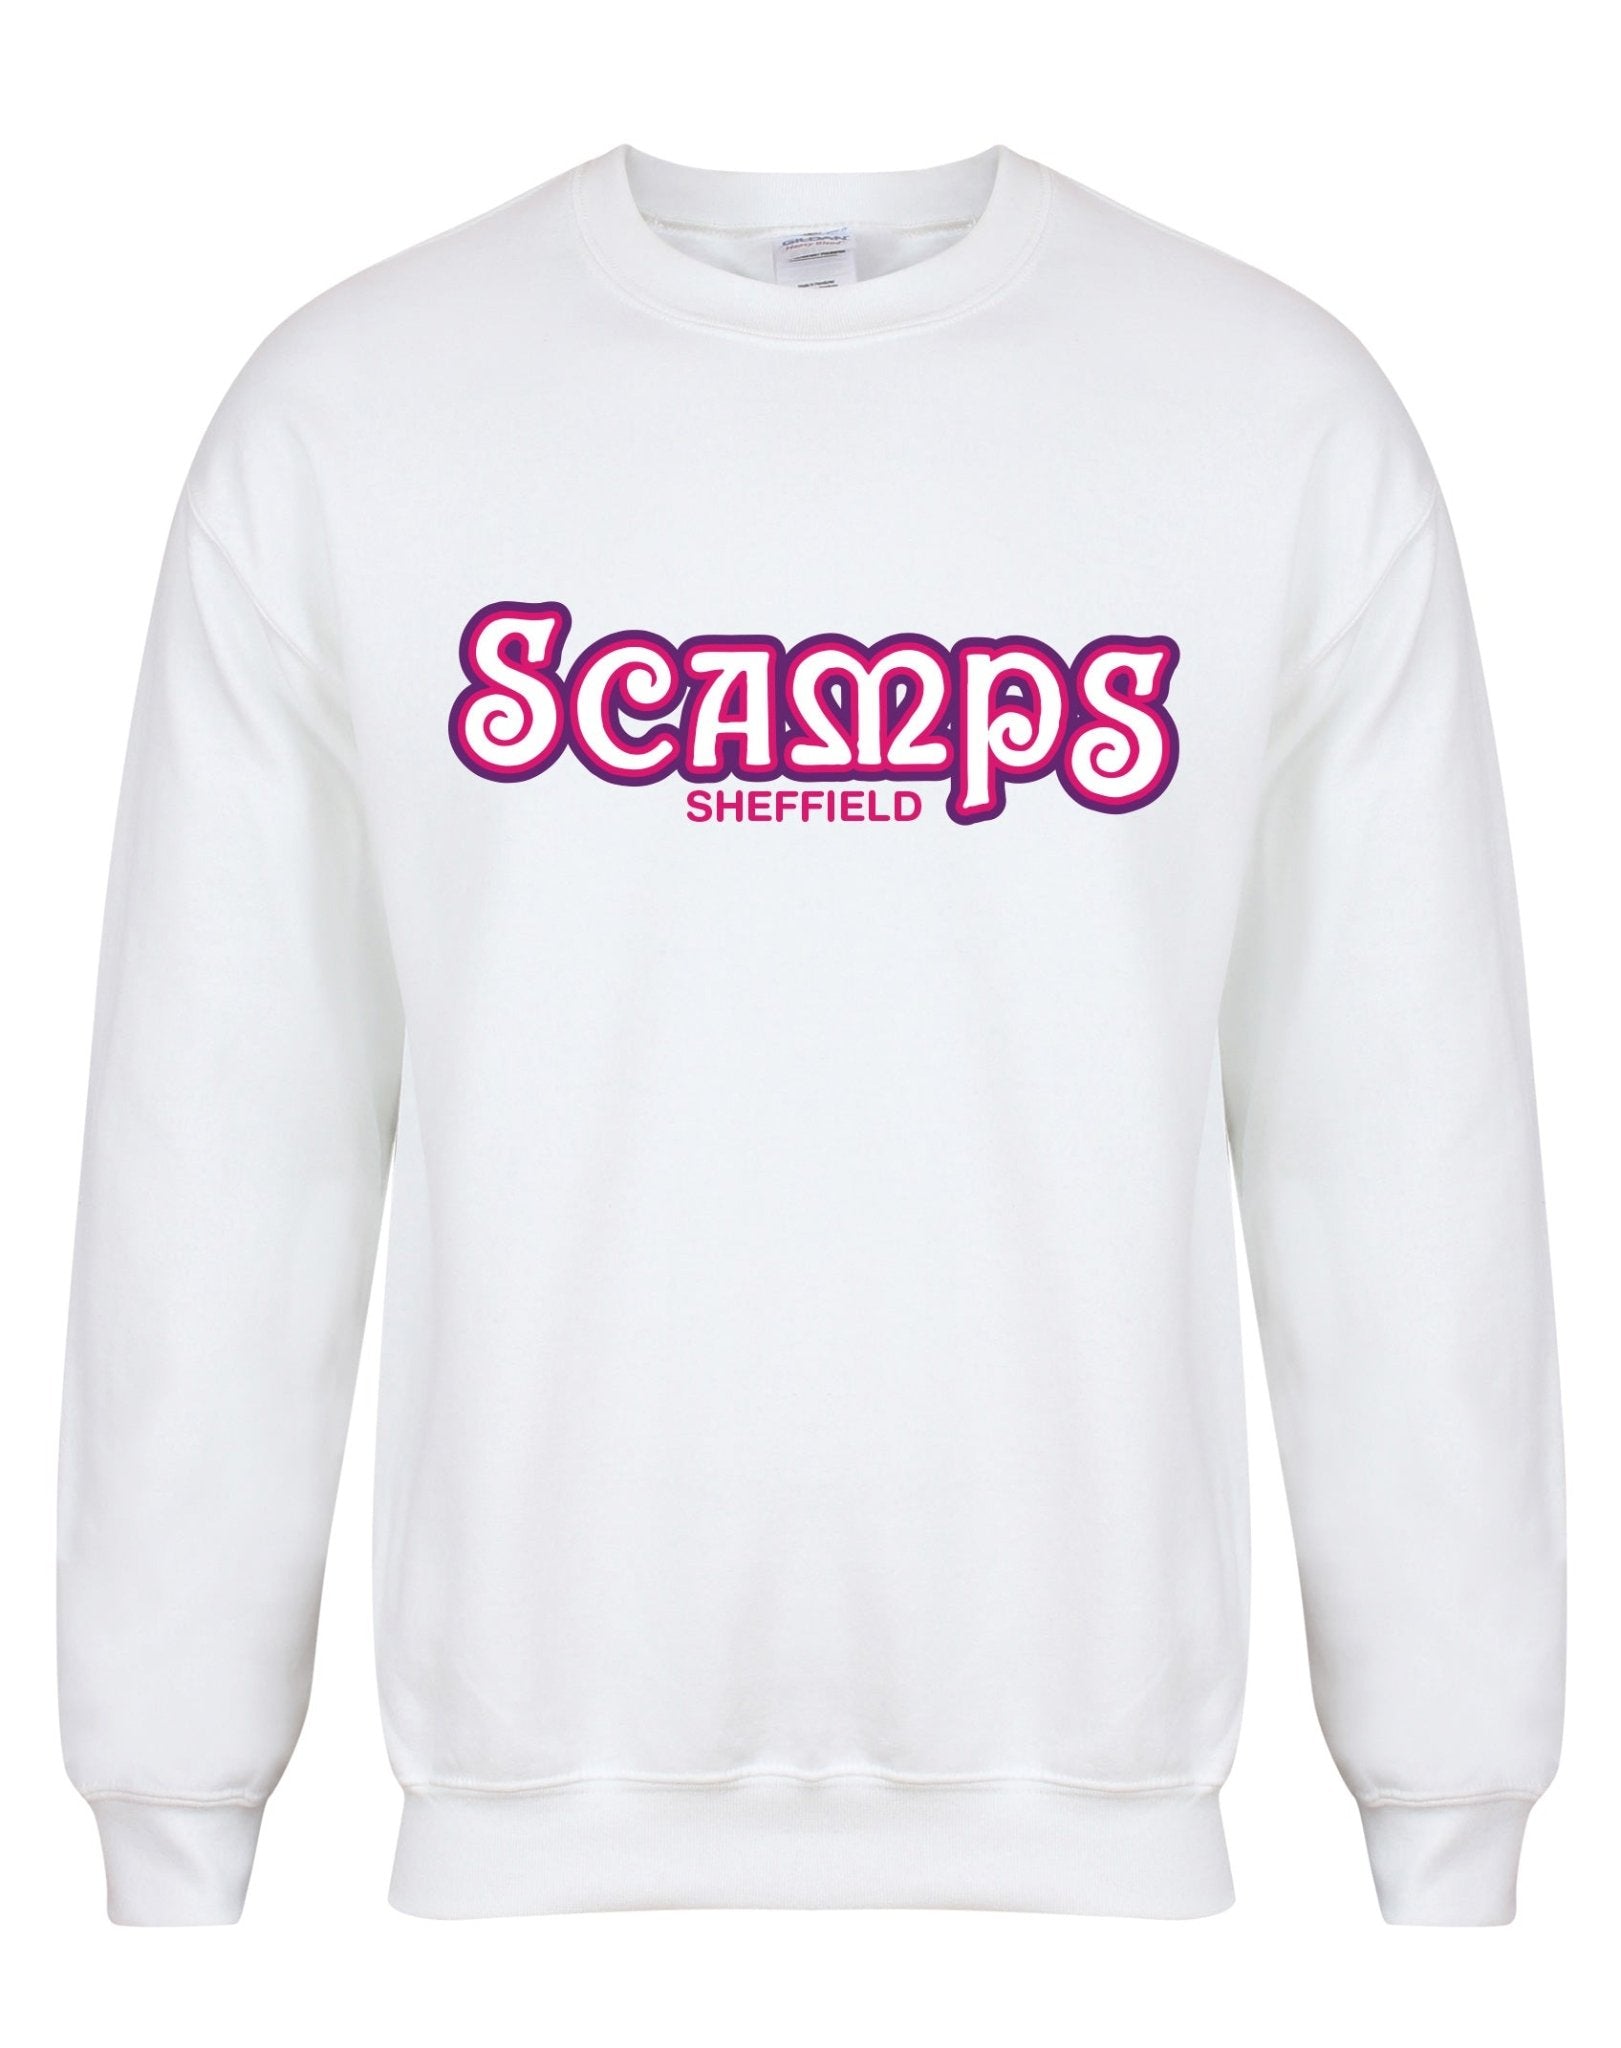 Scamps unisex sweatshirt - various colours - Dirty Stop Outs